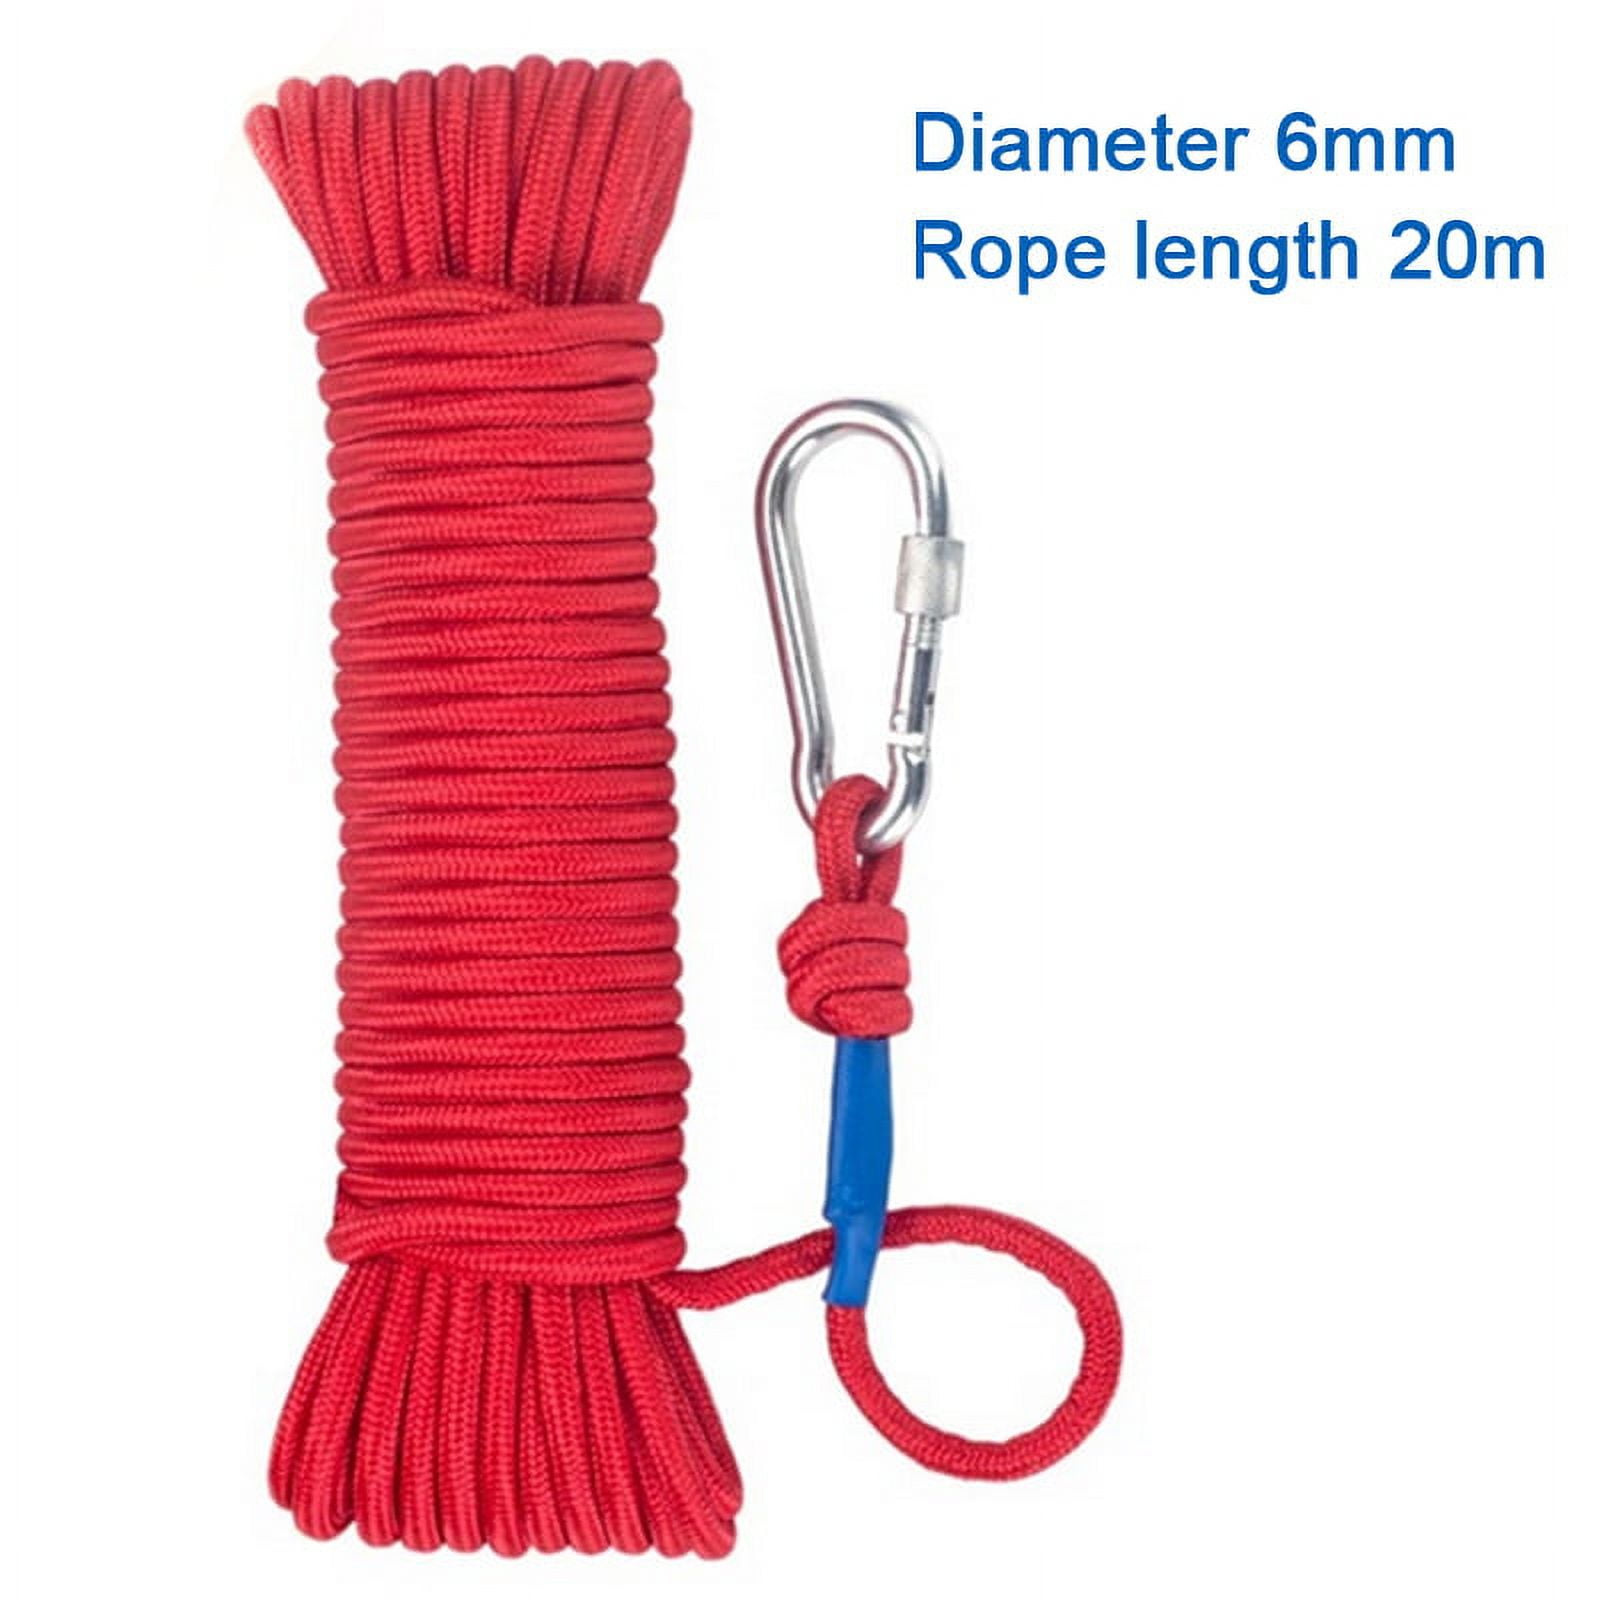 20m Nylon Rope Fishing Rope Safe High Strength Braid Rope with Carabiner  Safety Lock;20m Nylon Rope Fishing Rope Safe High Strength Braid Rope with  Safety Lock 